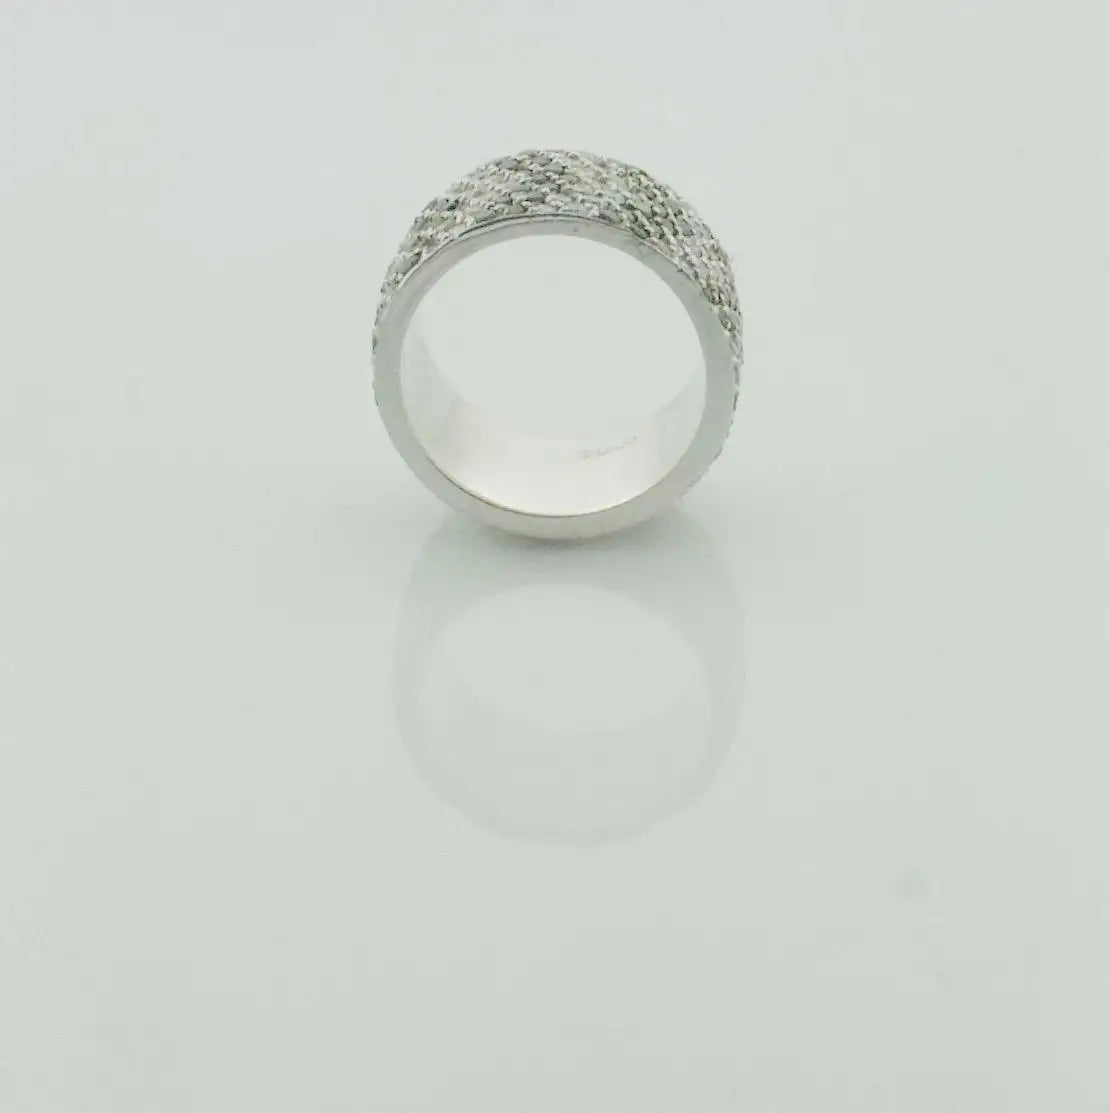 Black and White Diamond Pave' Wide Eternity Band